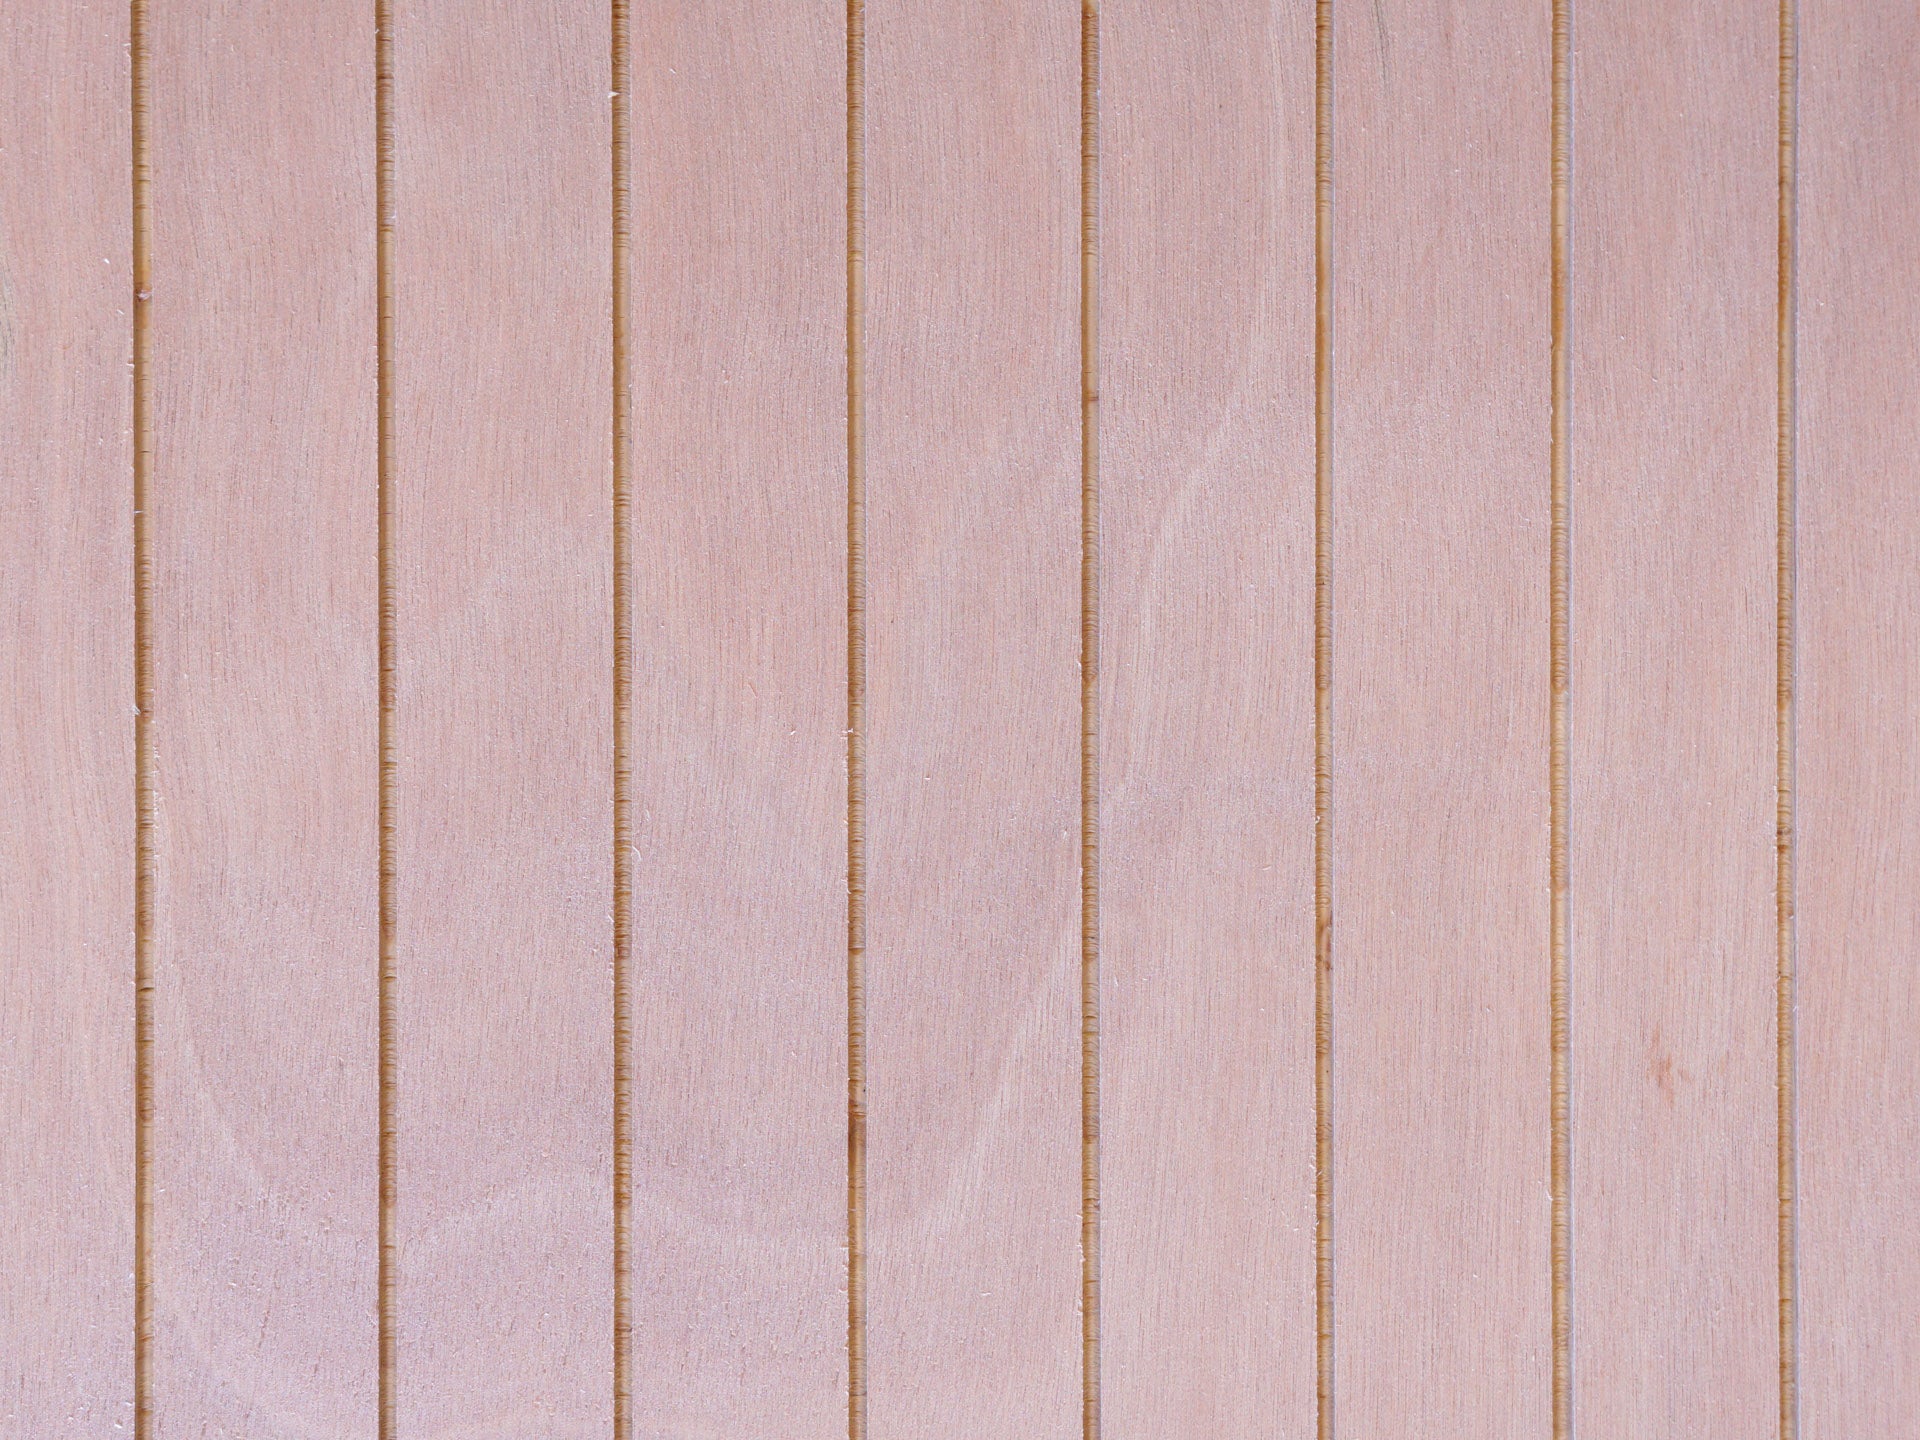 Close up of Vintage Plywood Millworks' Thinline siding showing the thin grooves and the wood grain